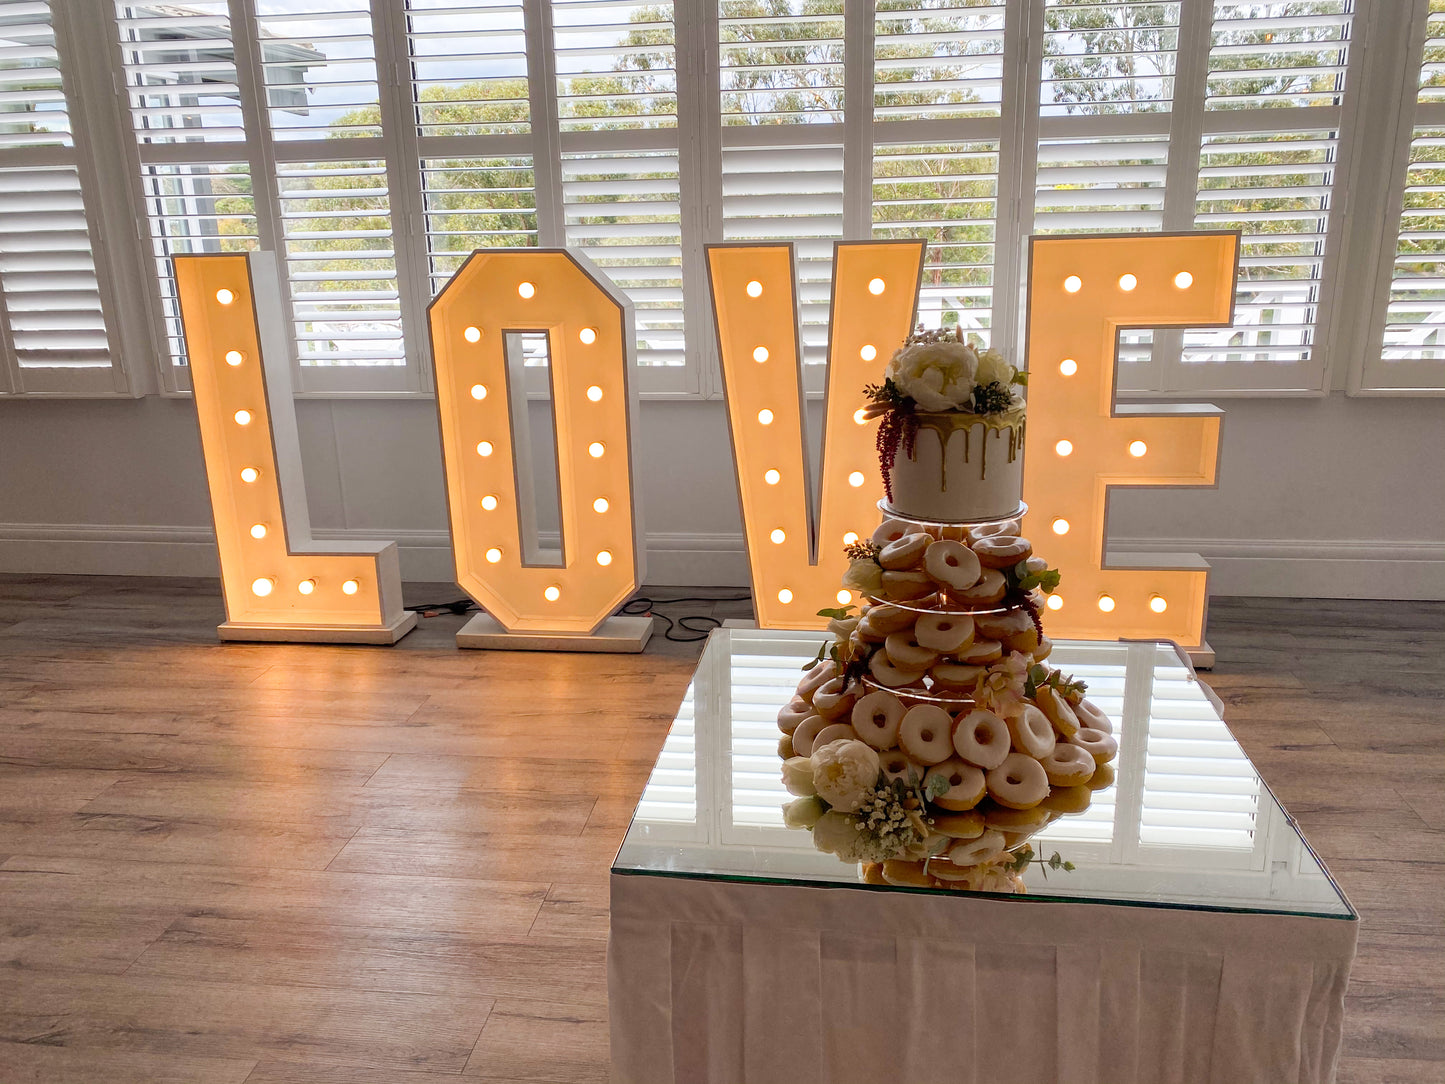 Donut Tower With Cutting Cake